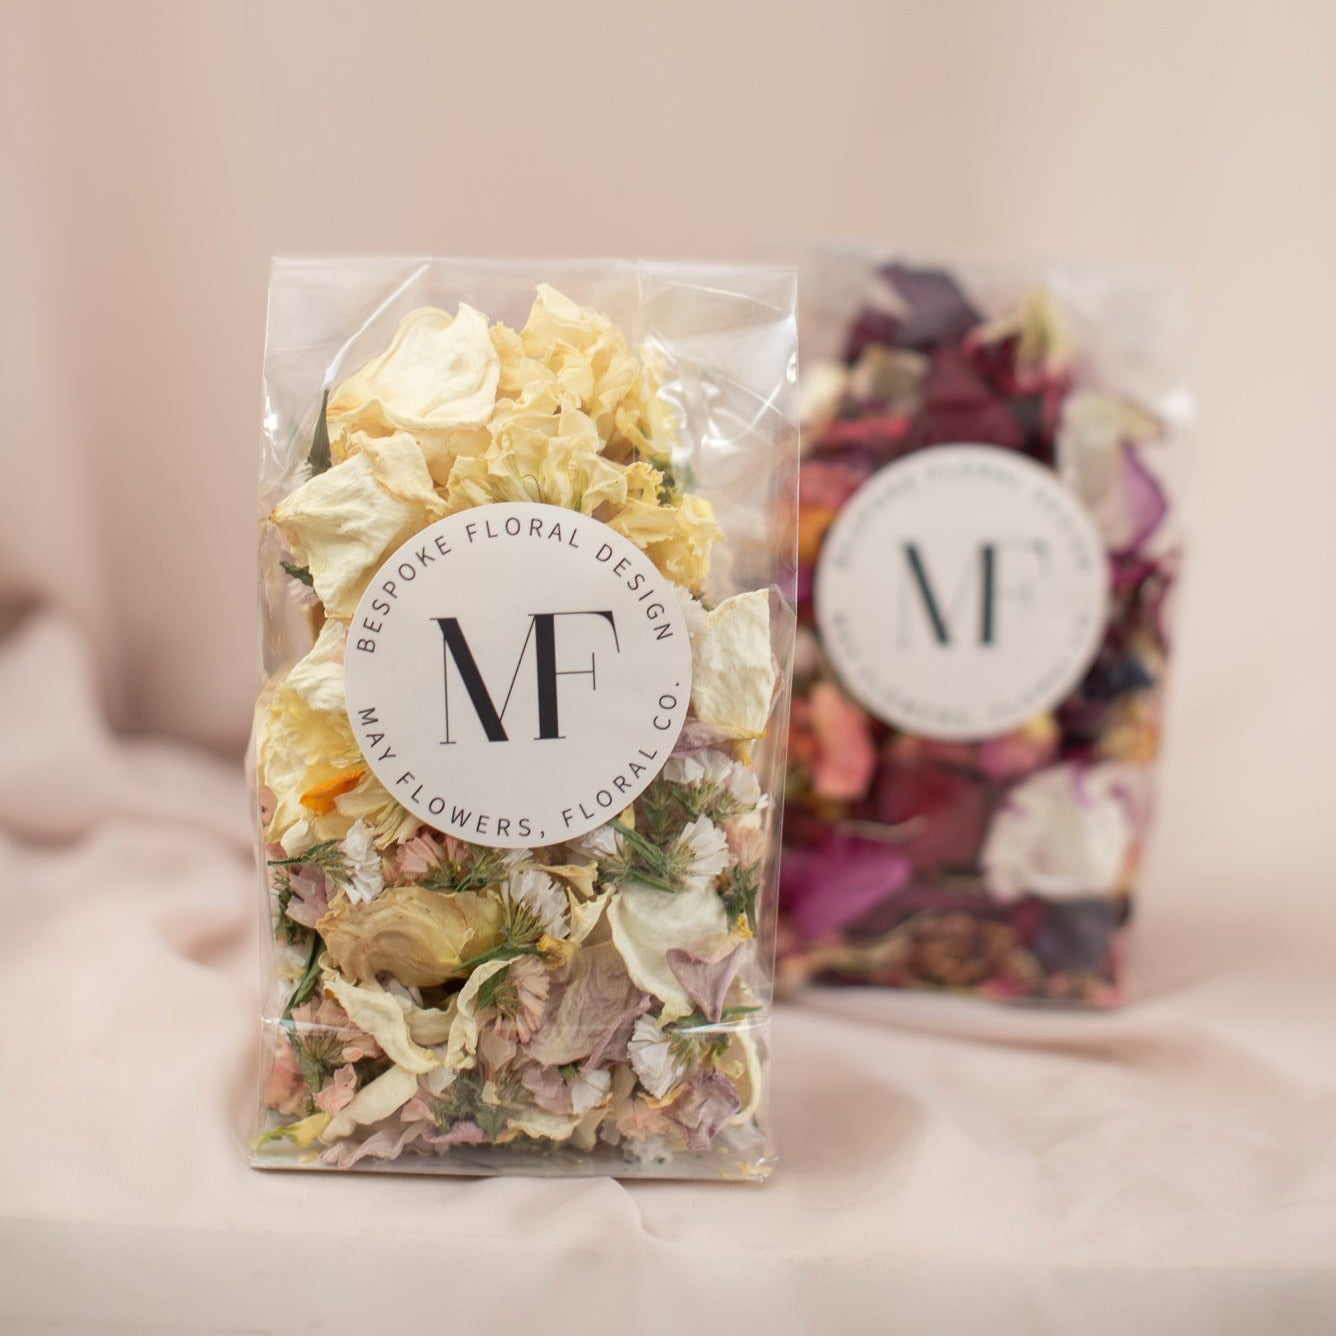 May Flowers' Potpourri Blend